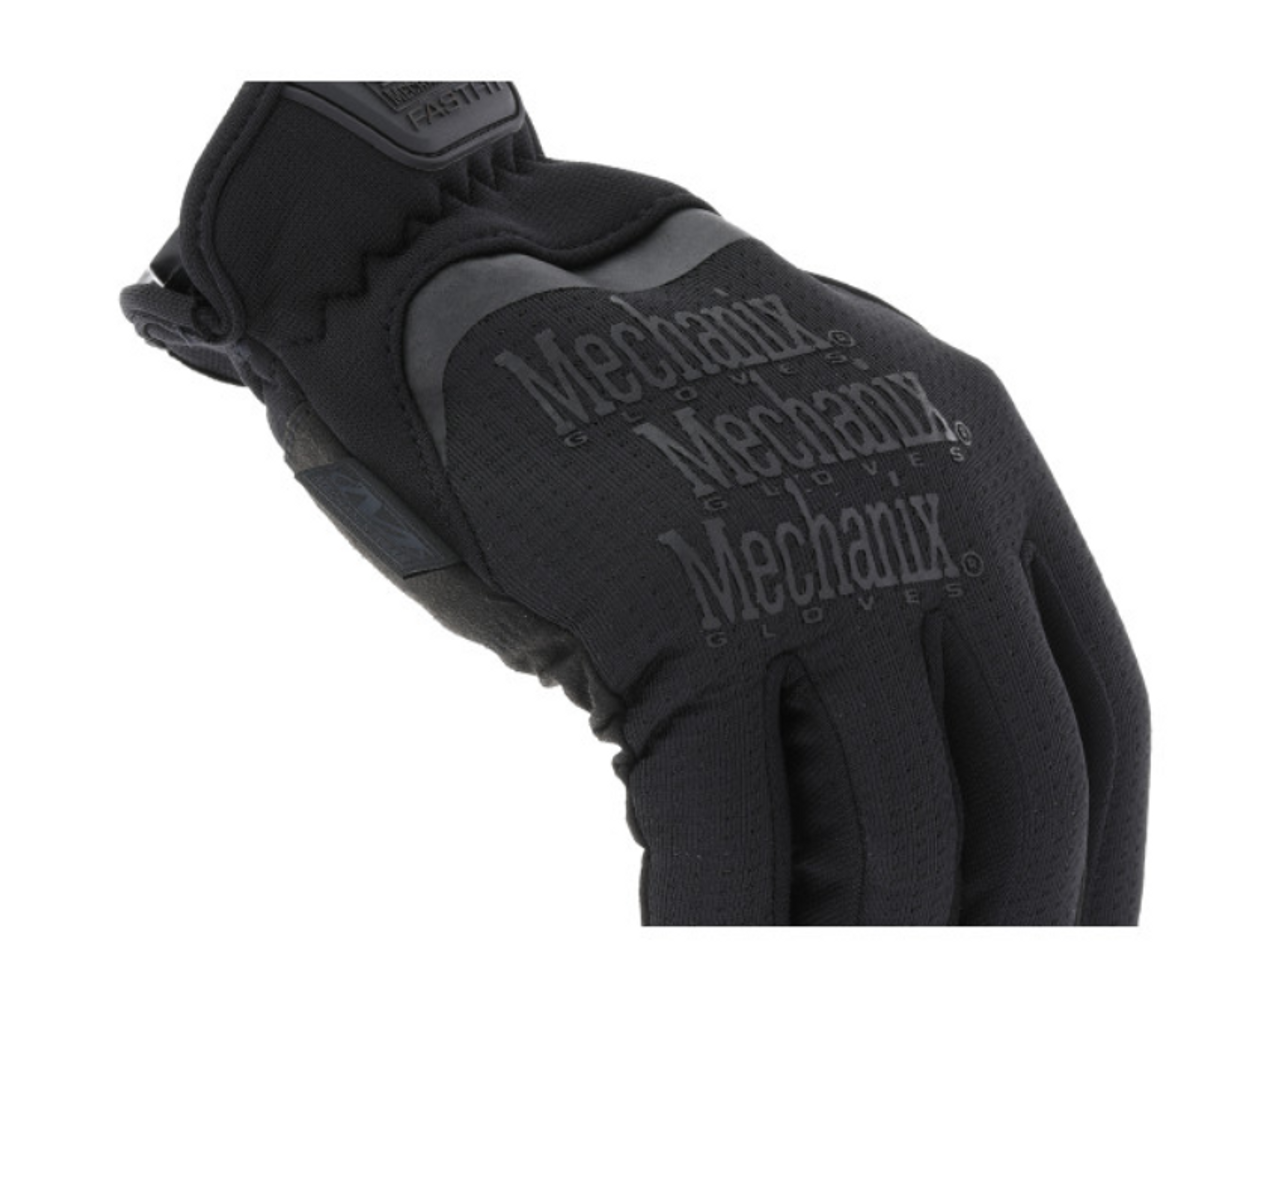 FastFit Covert Tactical Glove